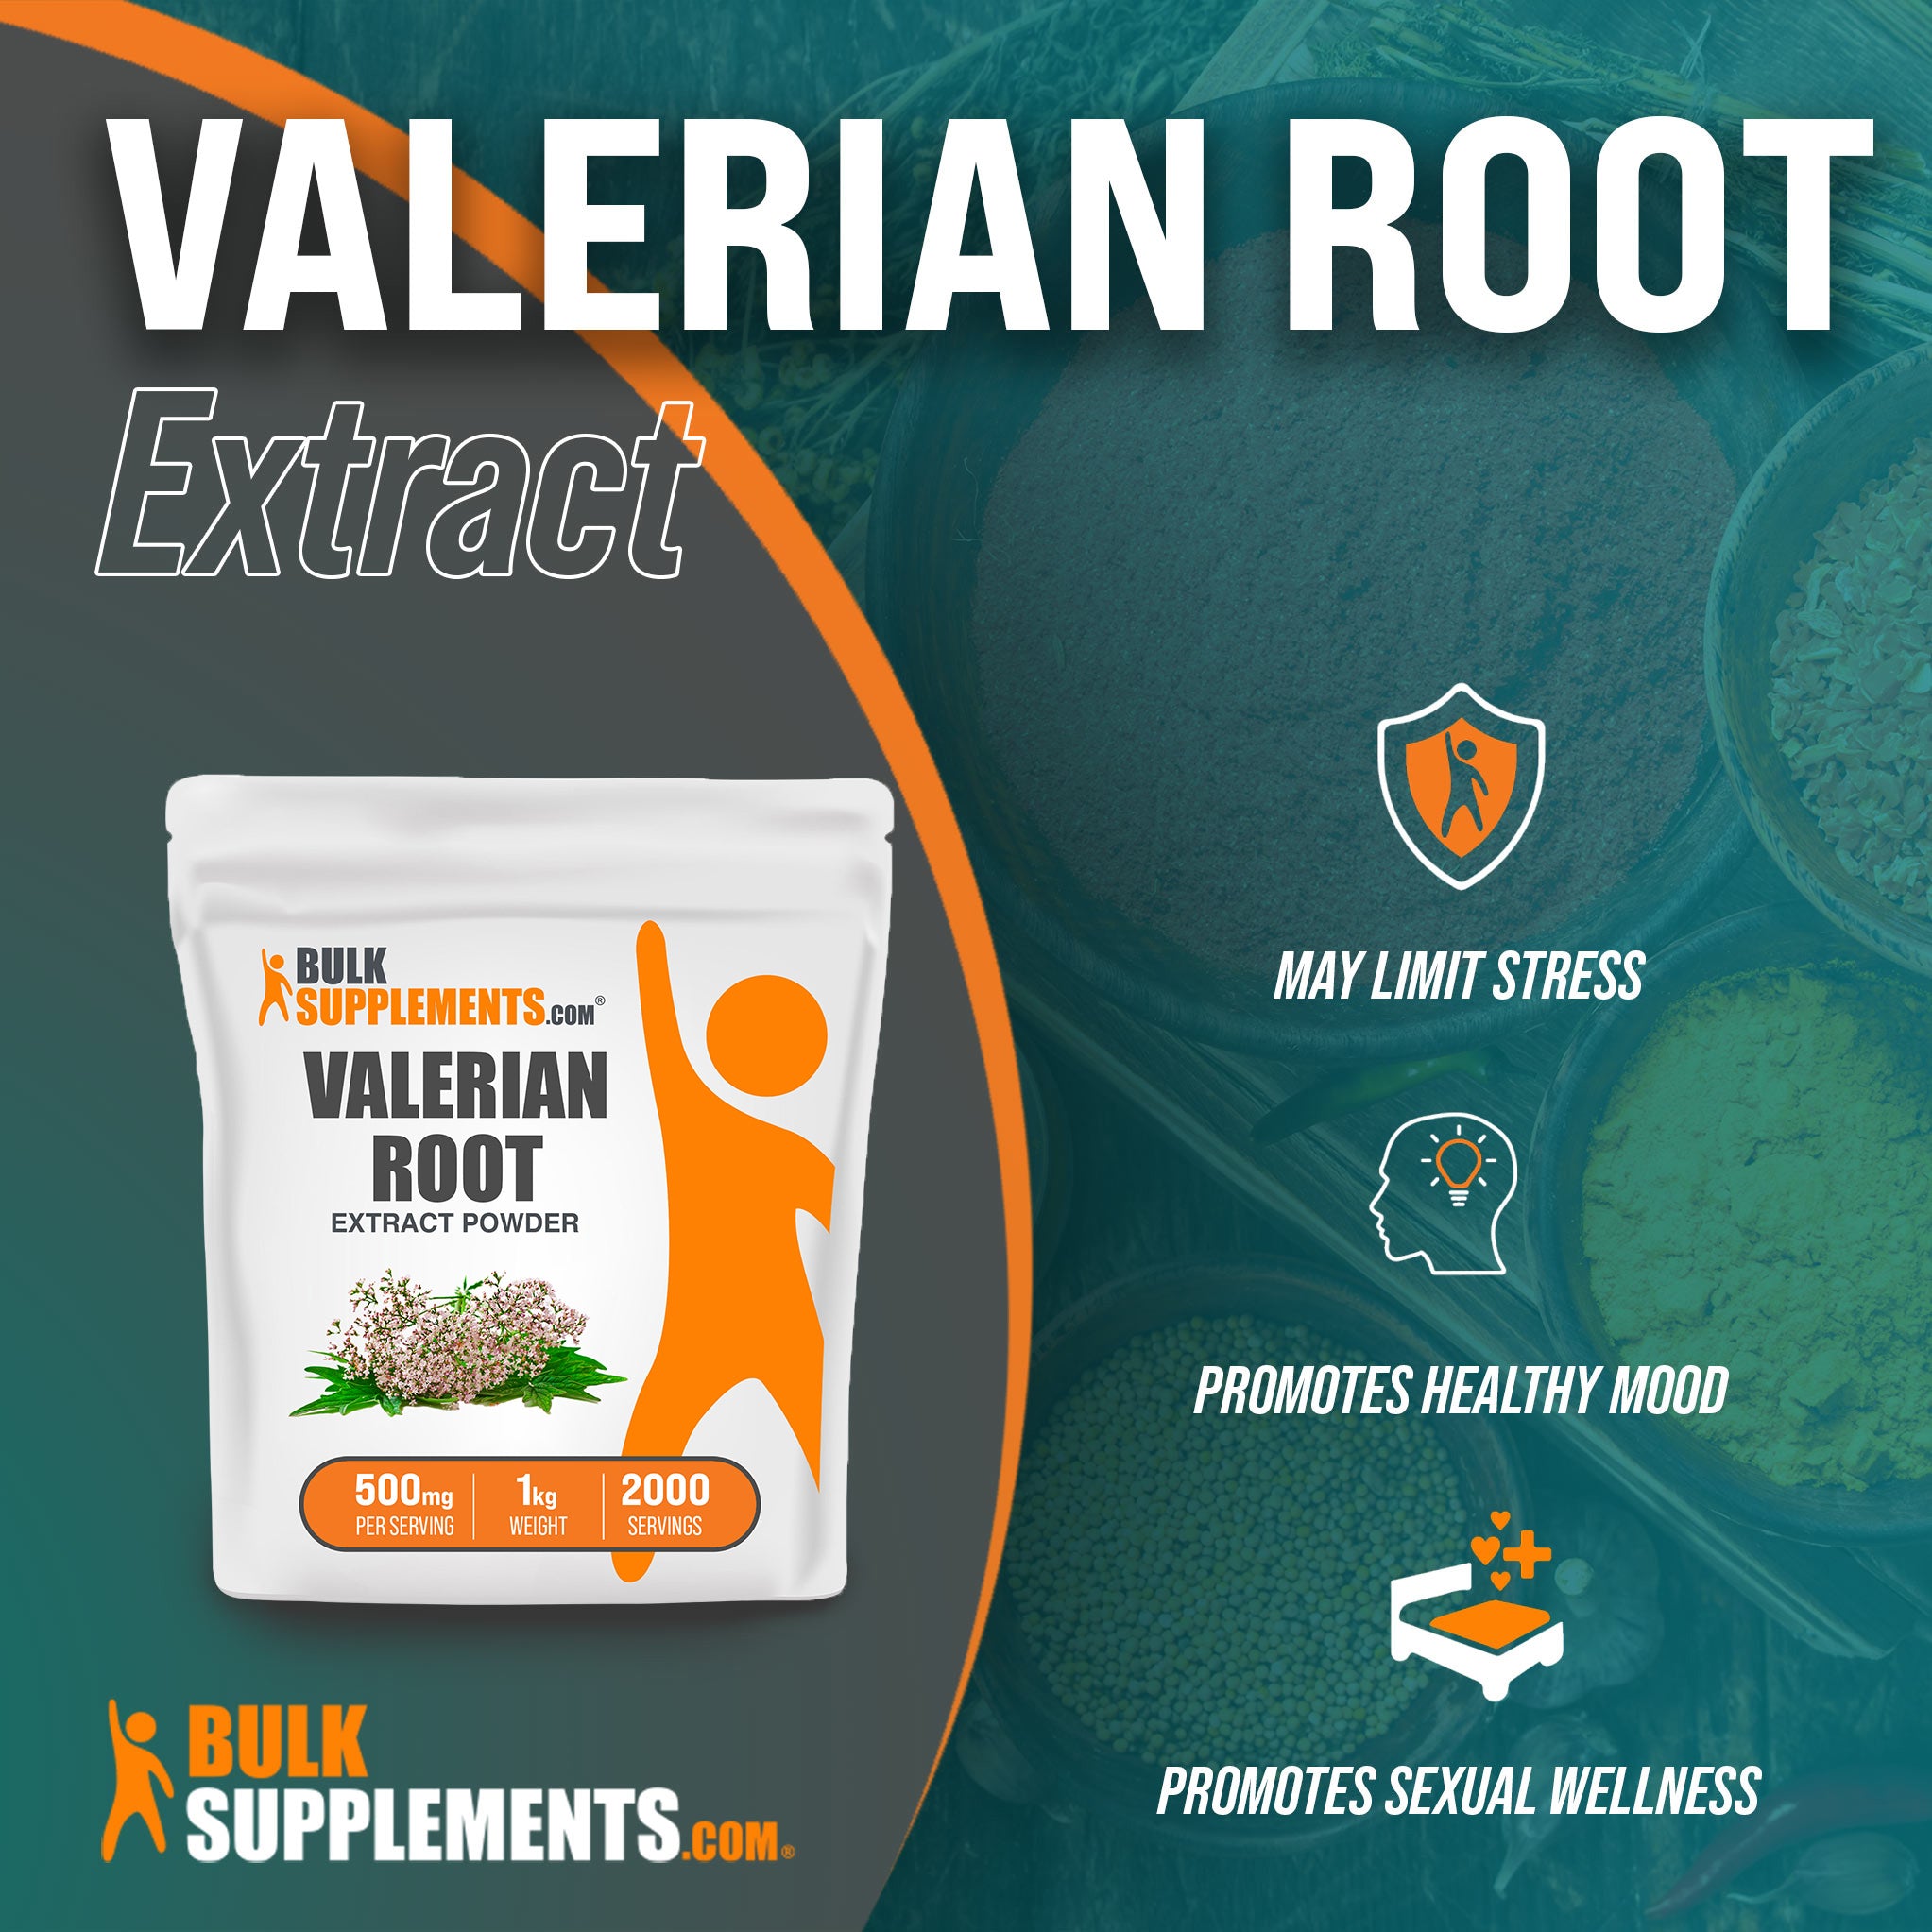 Benefits of Valerian Root Extract: may limit stress, promotes healthy mood, promotes sexual wellness